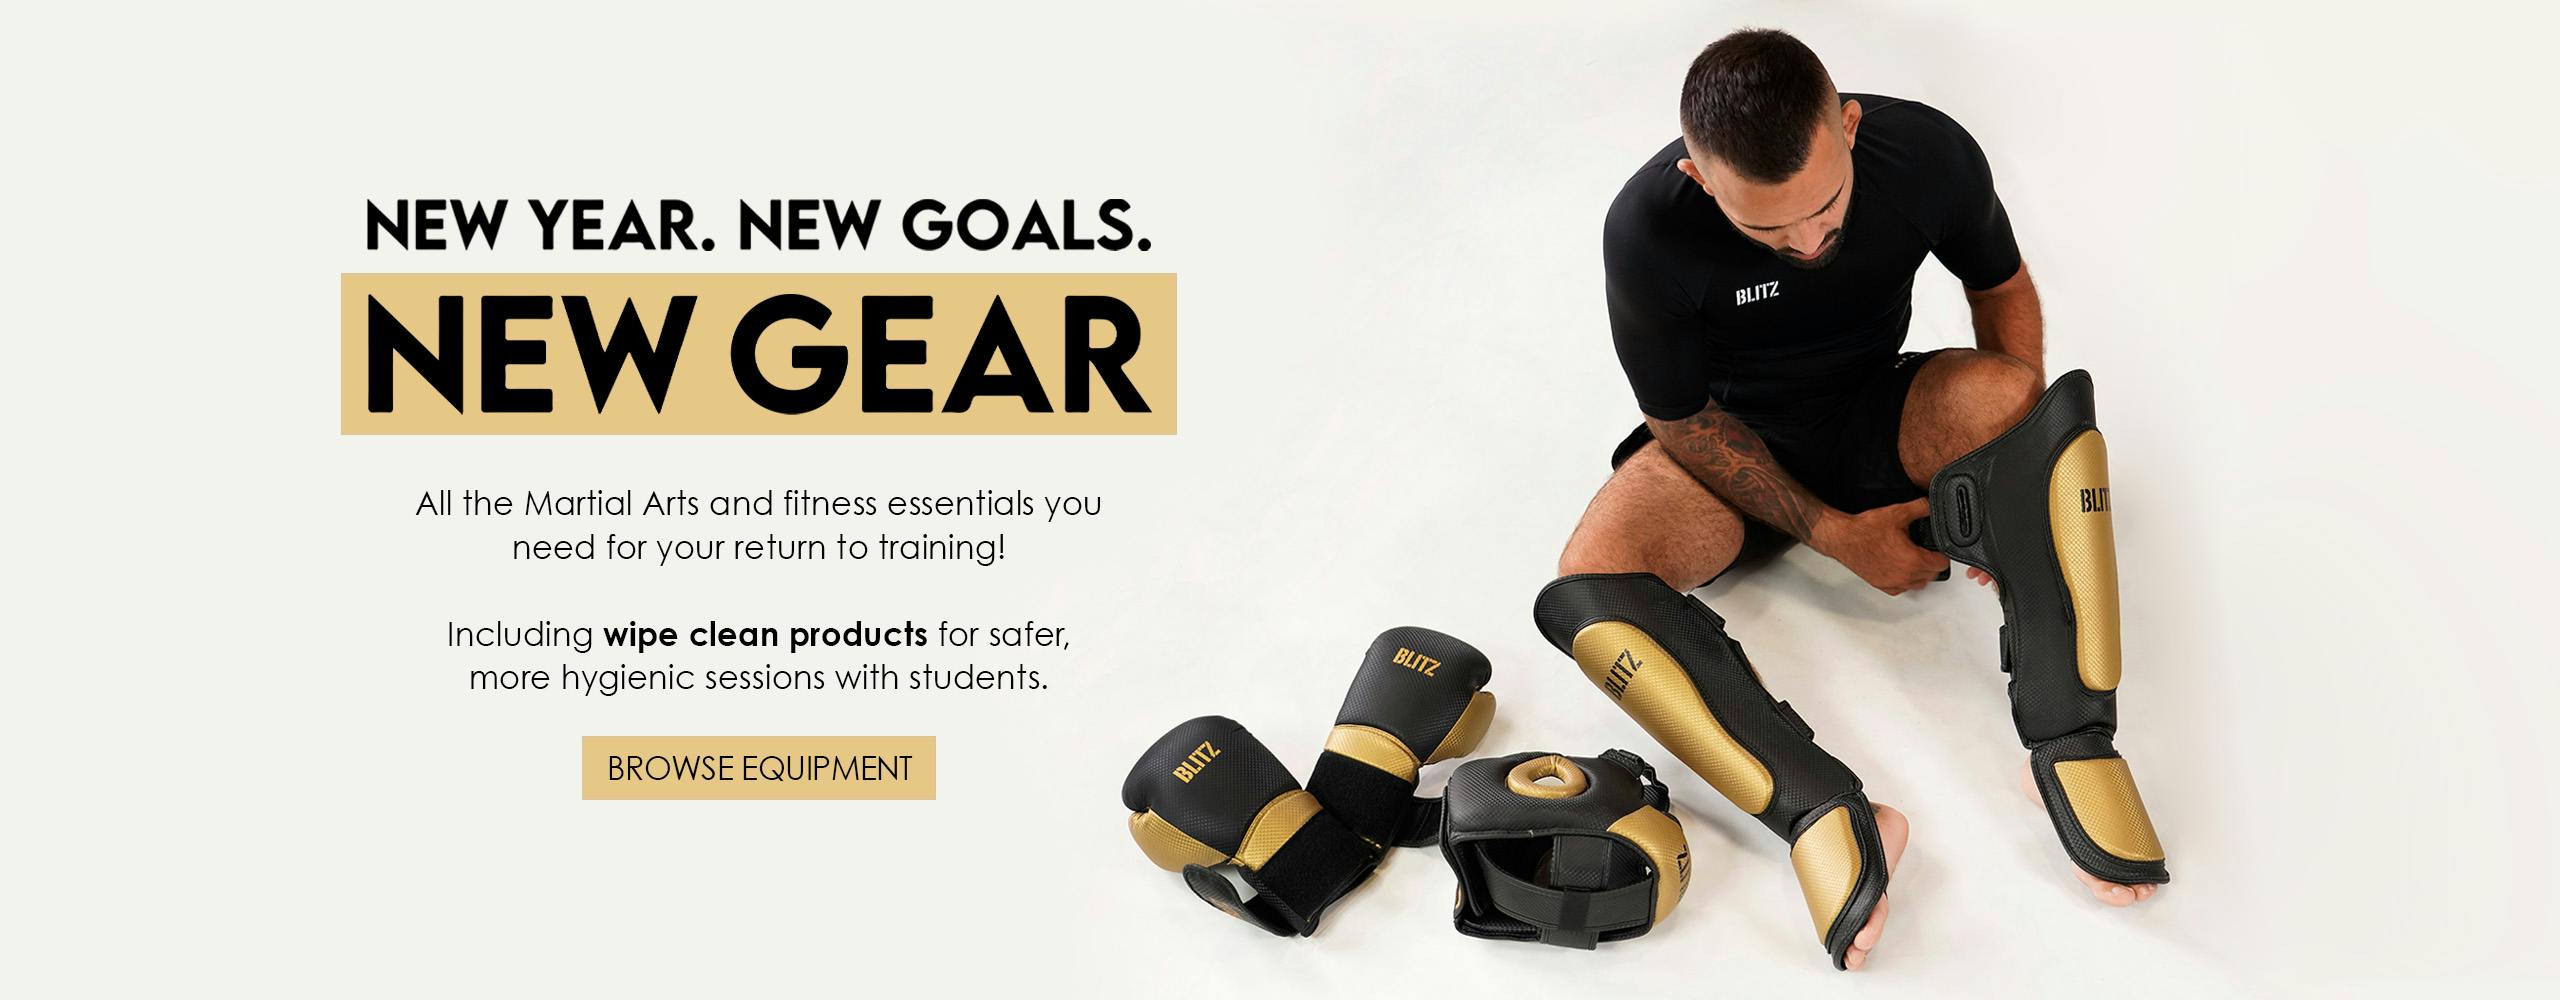 New Year. New Goals. New Gear. All the Martial Arts and fitness essentials you need for your return to training!